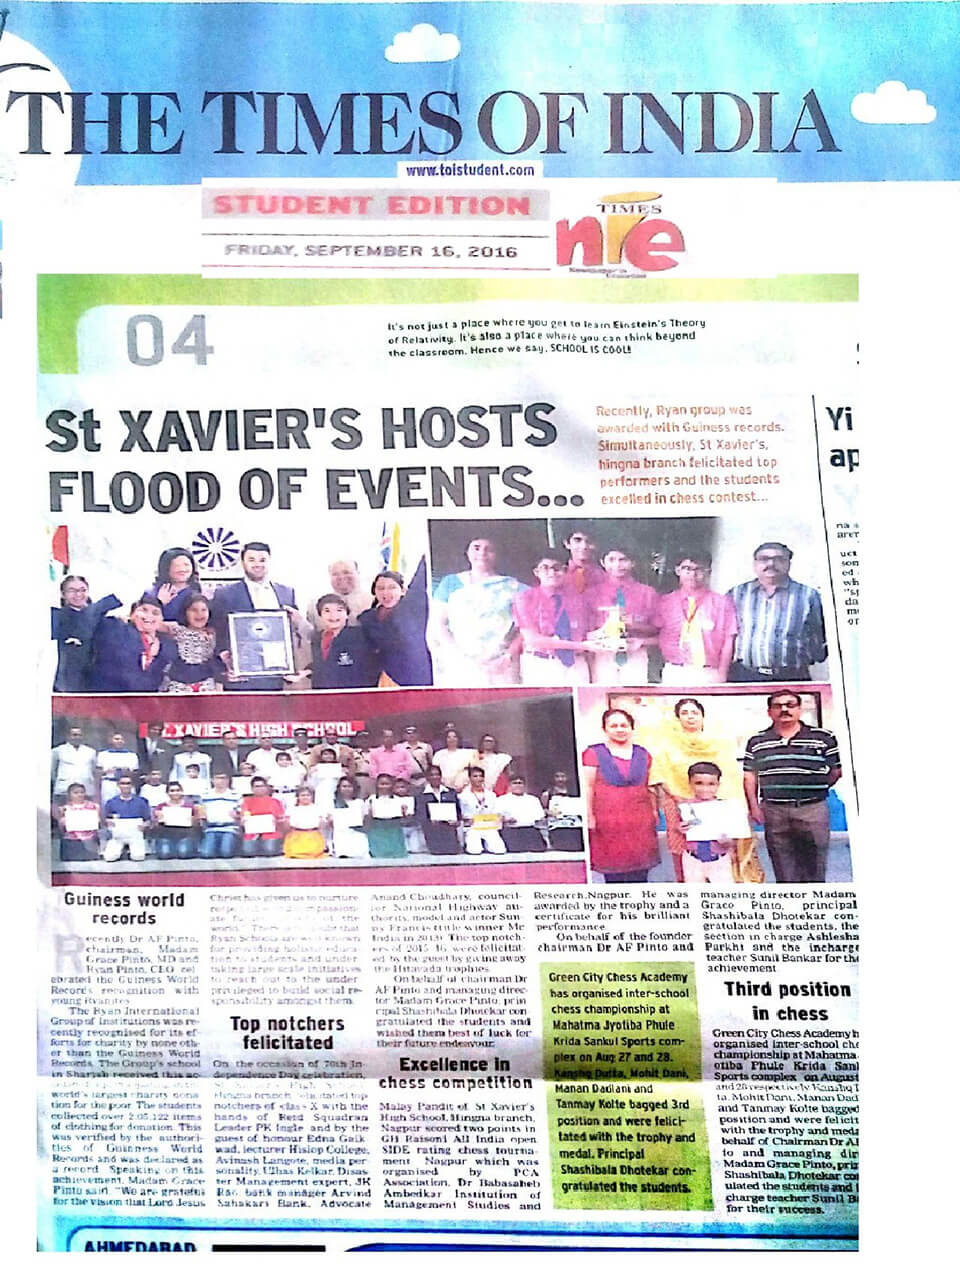 St Xavier's hosts flood of events